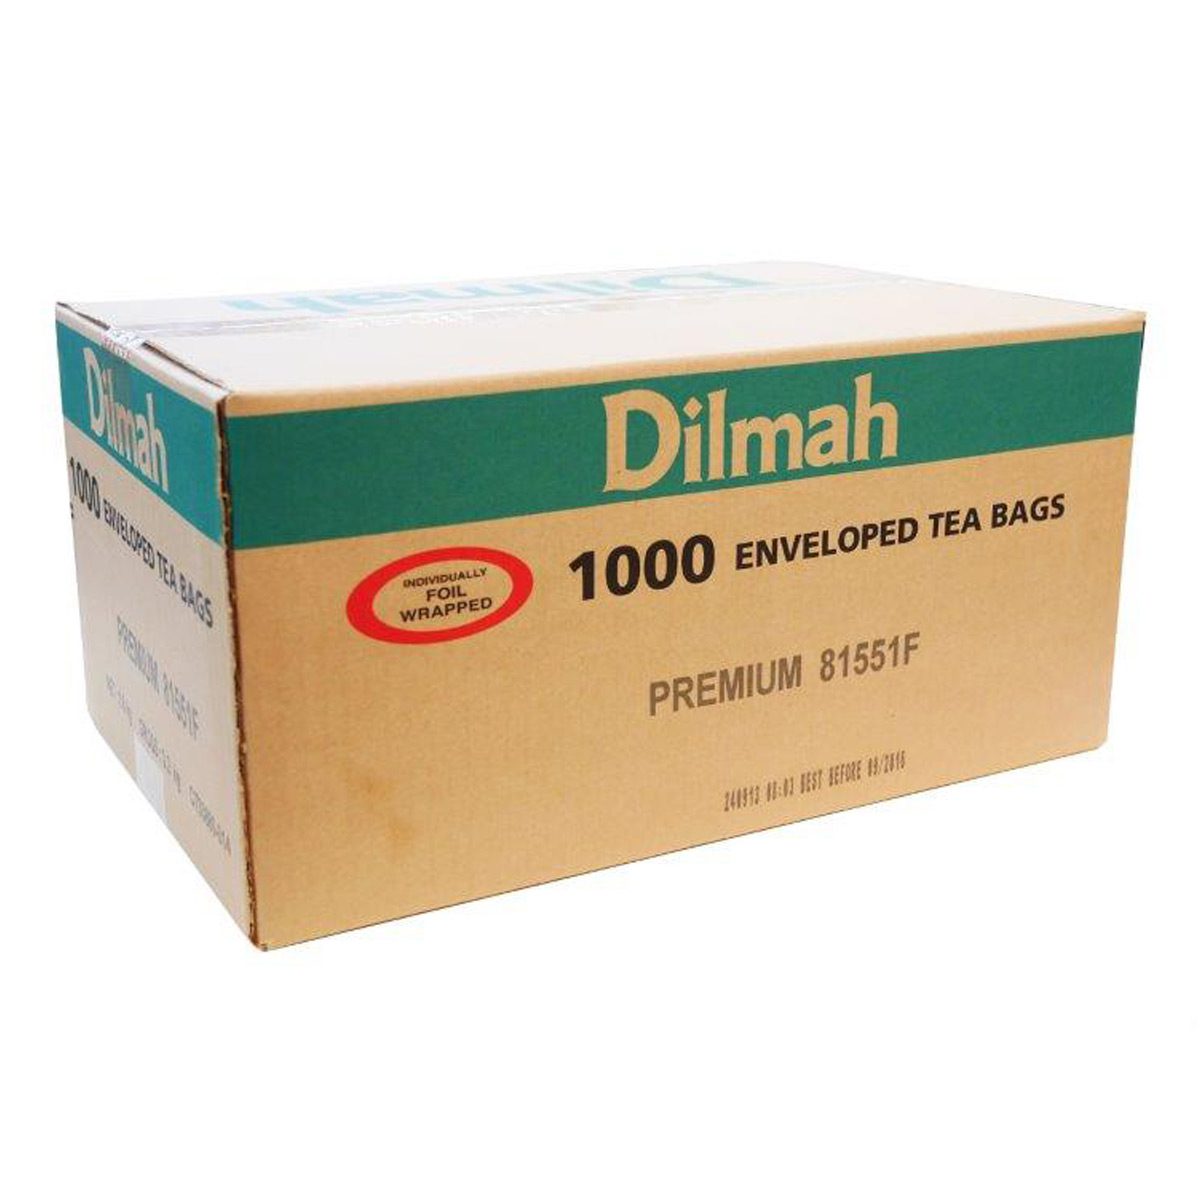 consumables-hospitality-beverage-food-dilmah-enveloped-tagless-teabags-1000pk-richness-flavour-strength-aroma-finest-high-grown-ceylon-tea-lunchroom-desk-drawer-3-4min-brew-vjs-distributors-80474001